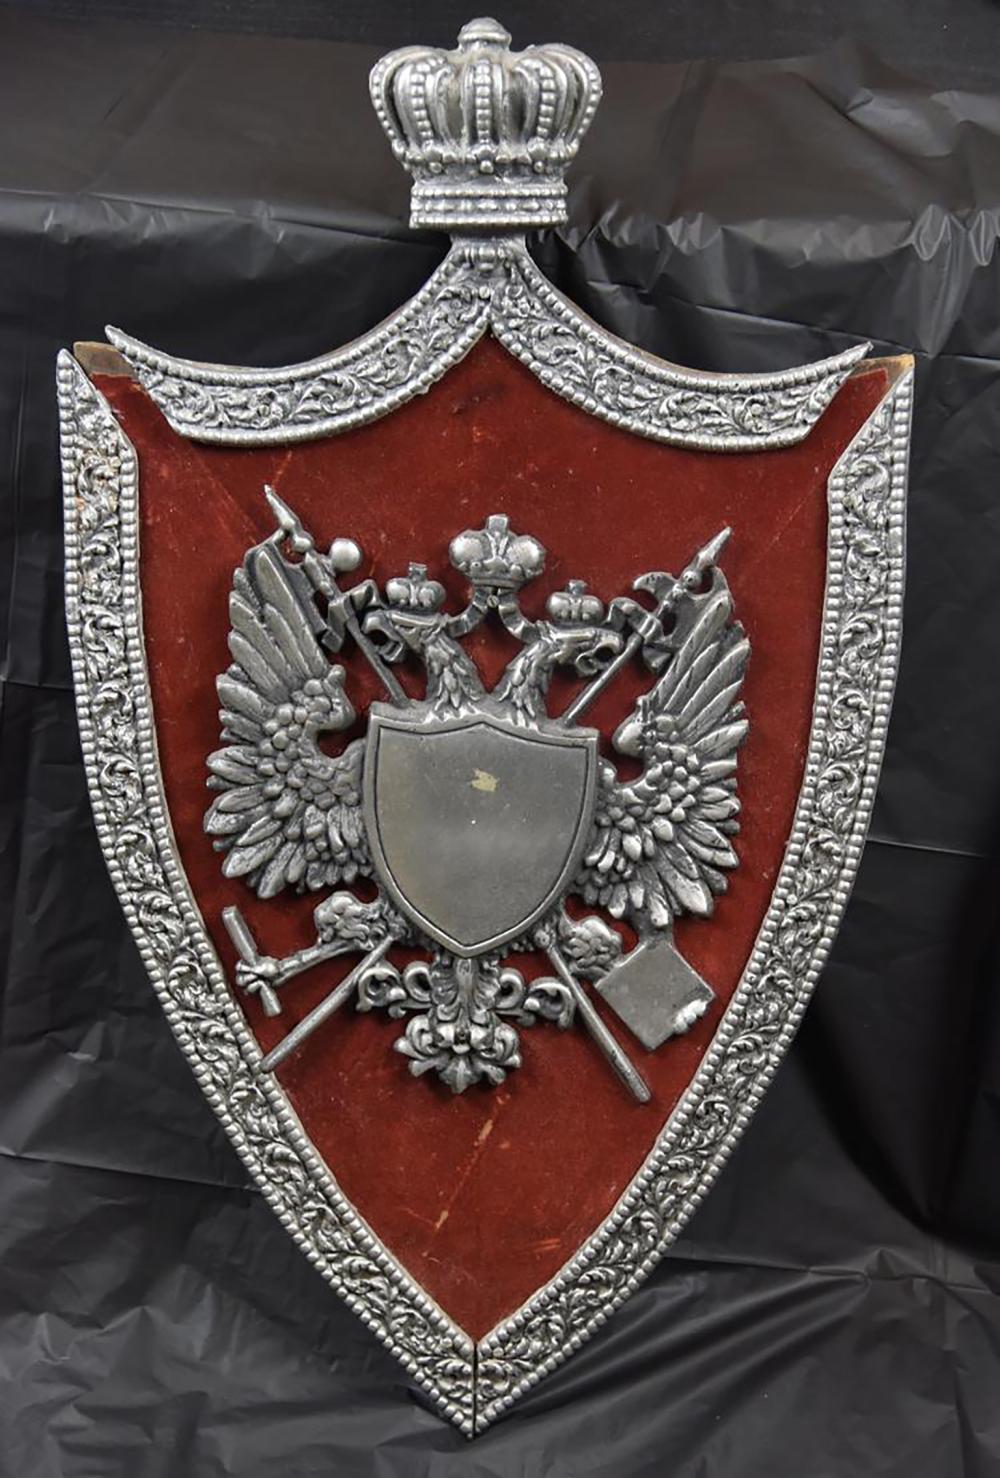 Two-Headed Red Eagle Logo - Red Shield with Silver Holy Roman Empire Double Headed Eagle